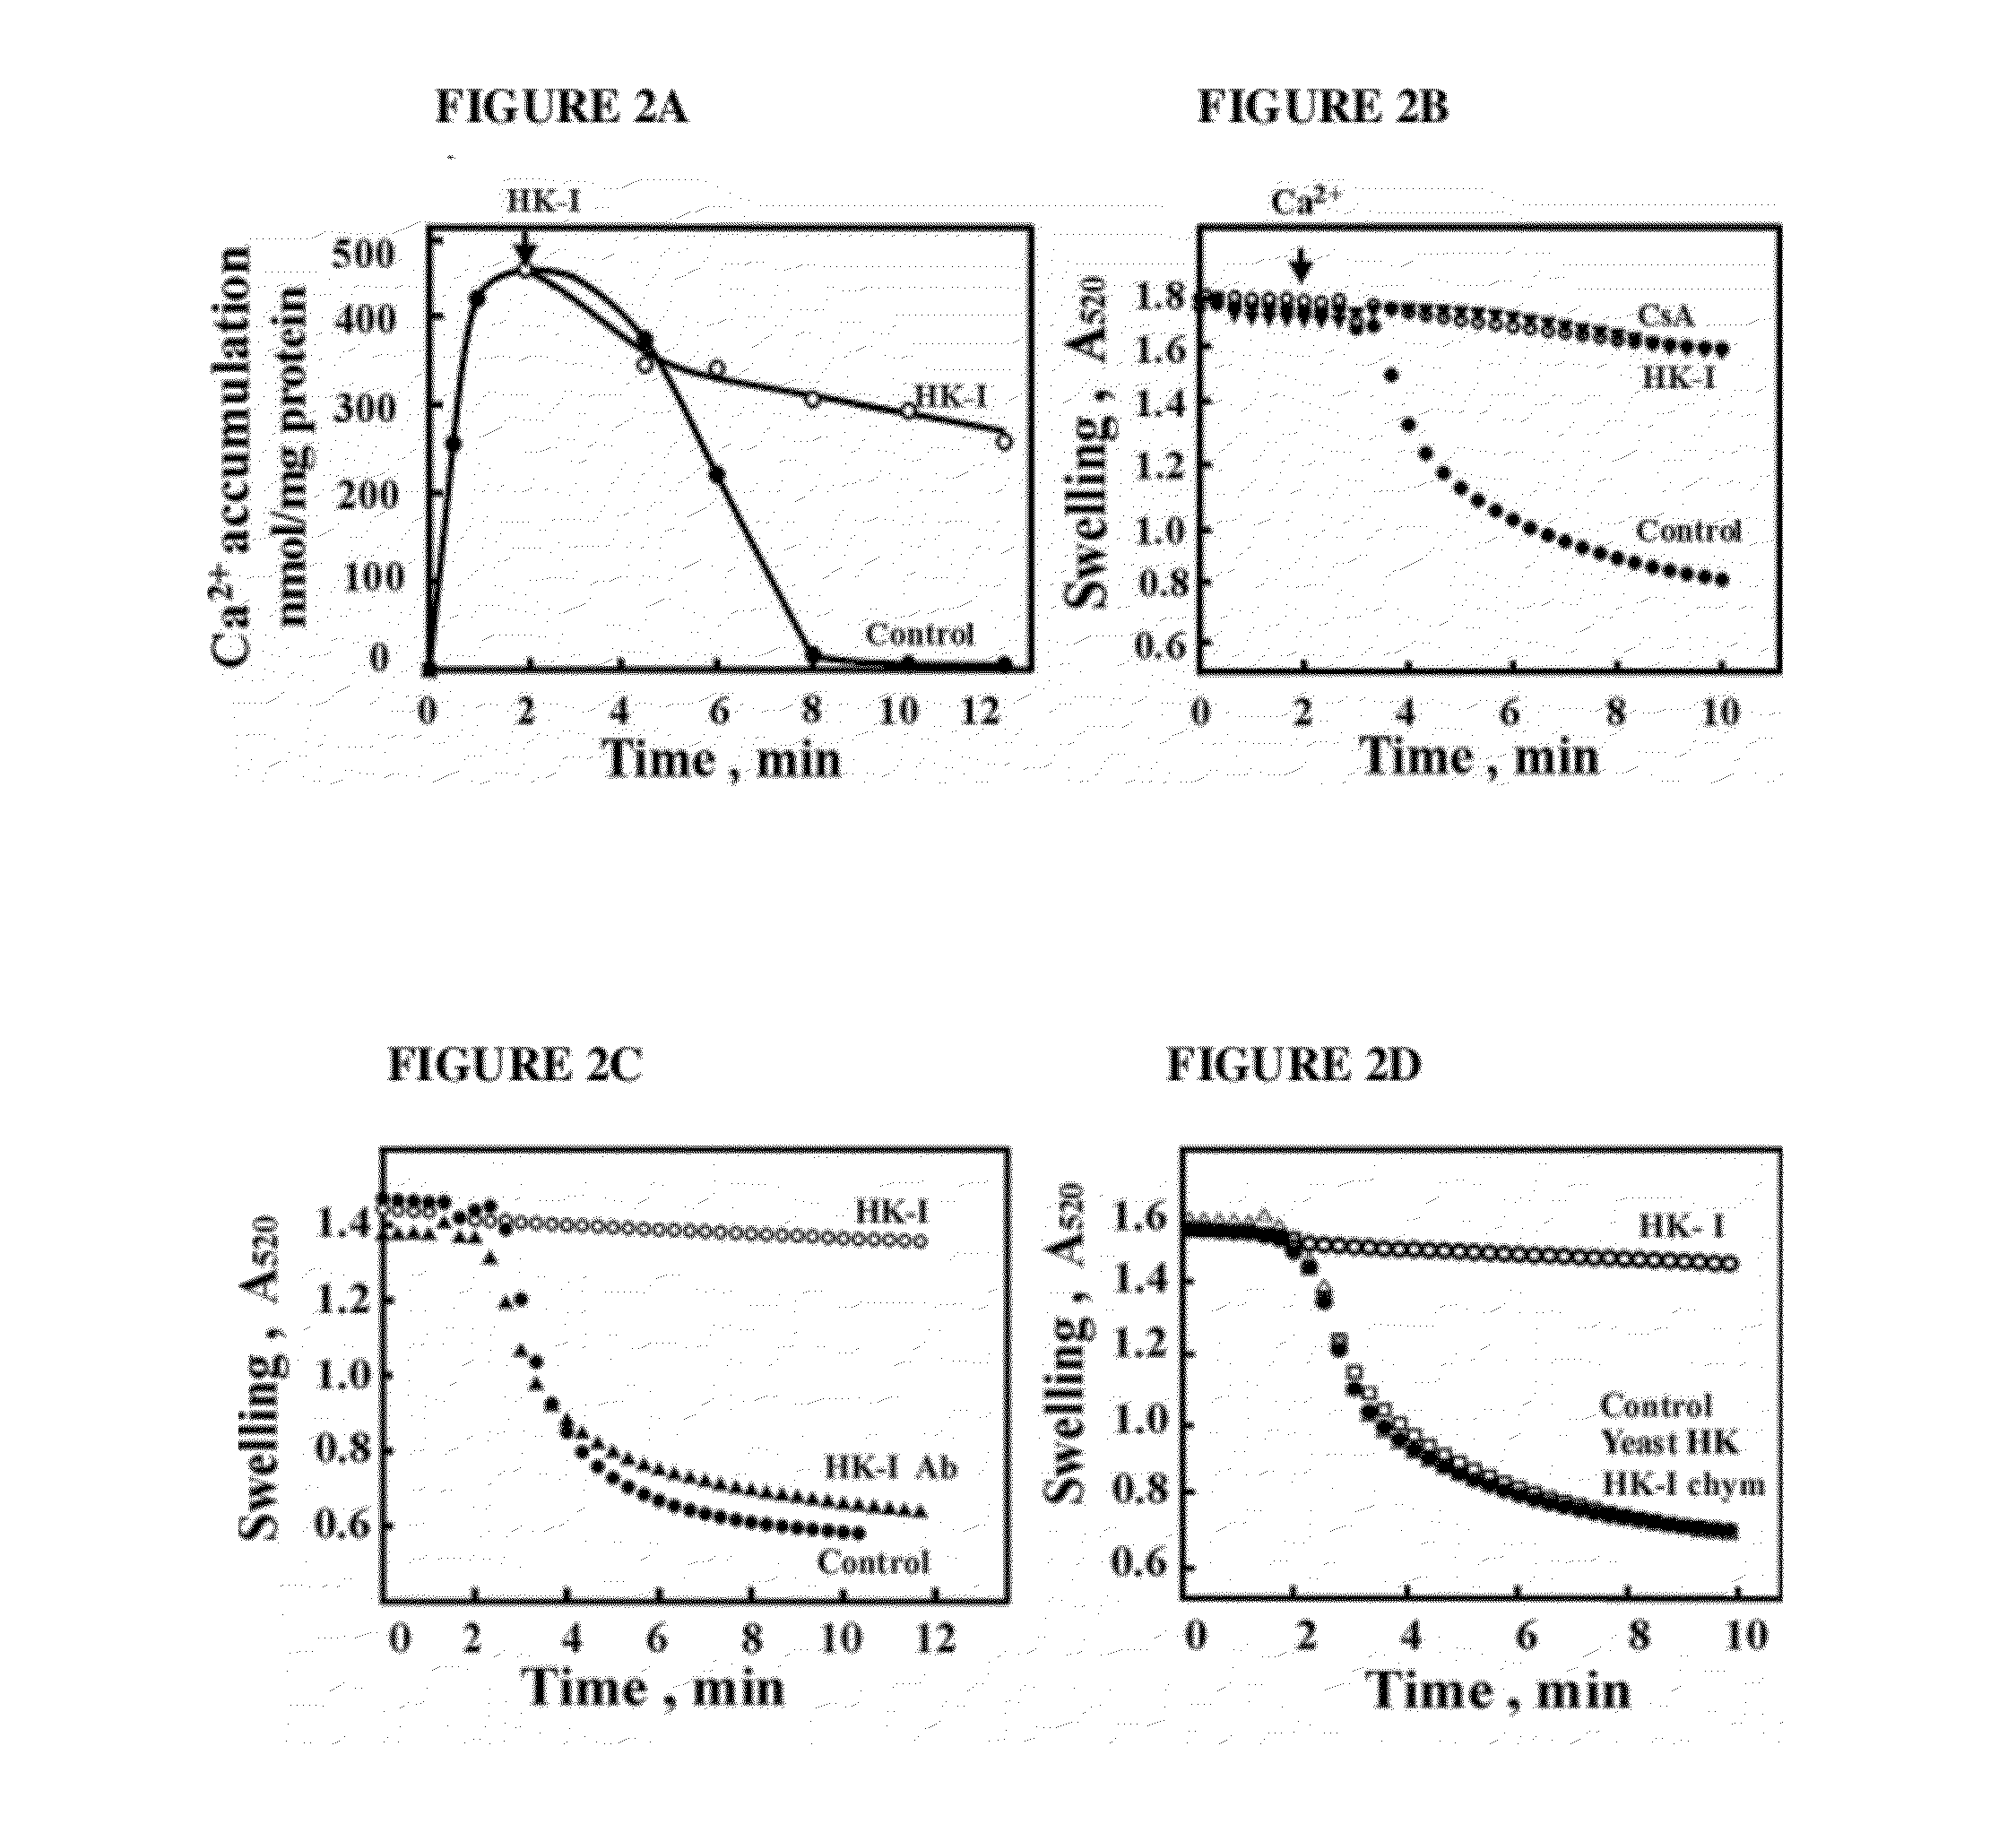 Vdac1 compositions and methods of use thereof for regulating apoptosis